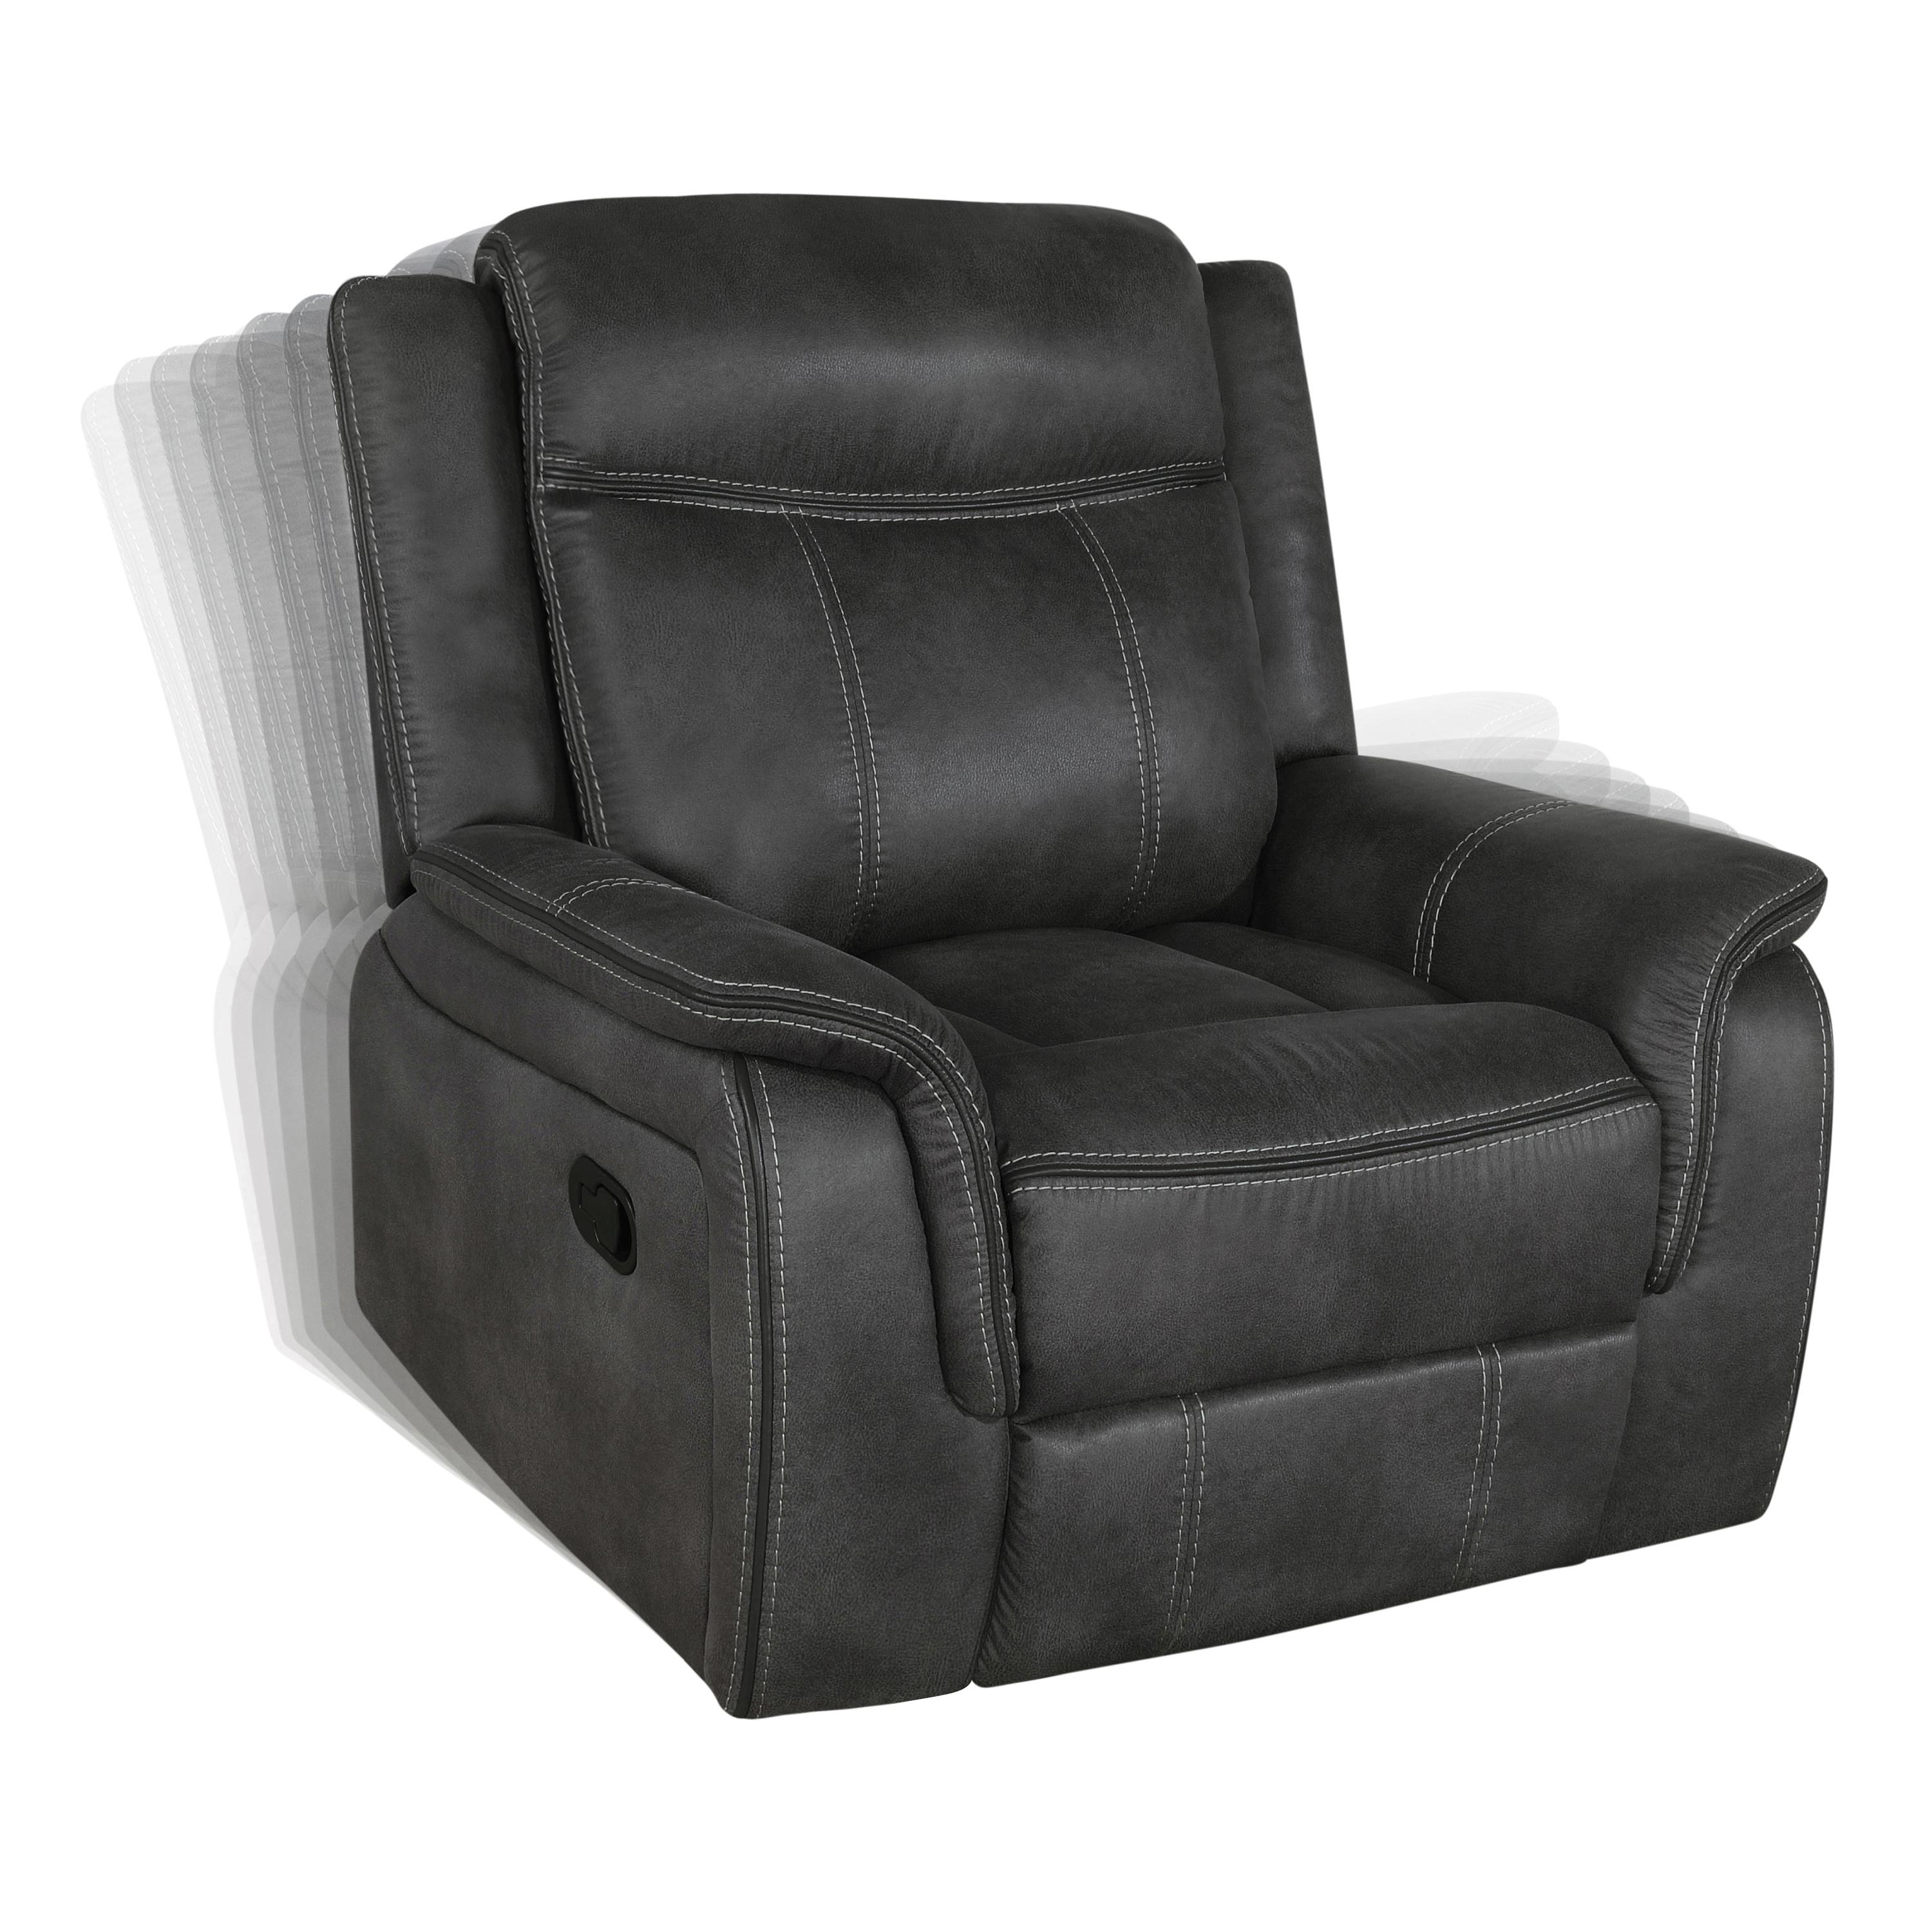 

    
Transitional Charcoal Coated Microfiber Glider Recliner Coaster 603506 Lawrence
